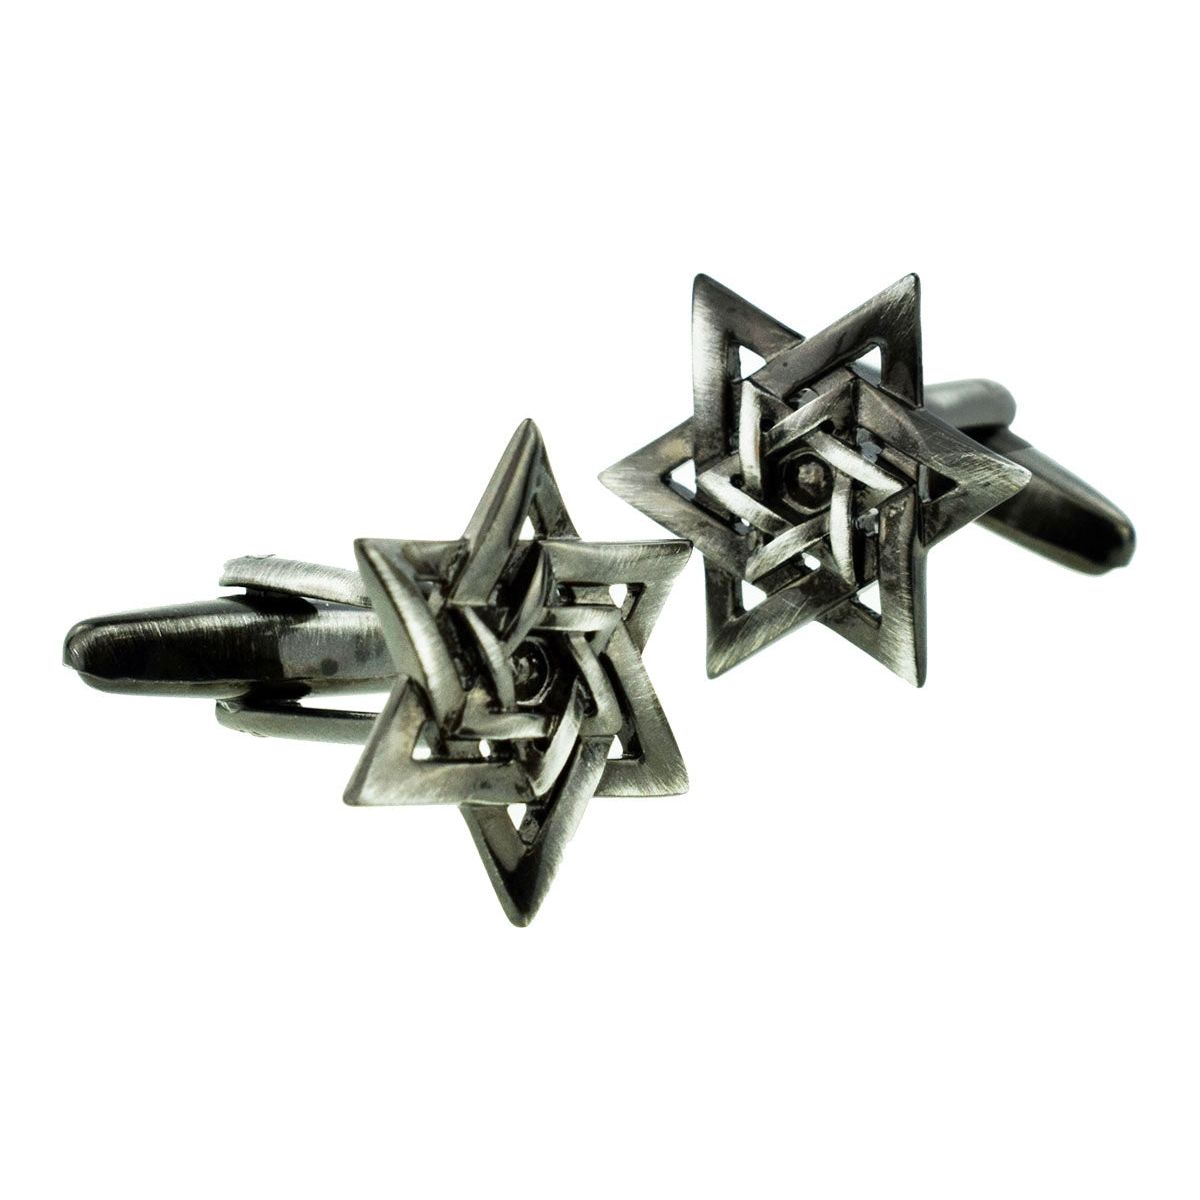 Antique Style Star of David Cufflinks - Ashton and Finch